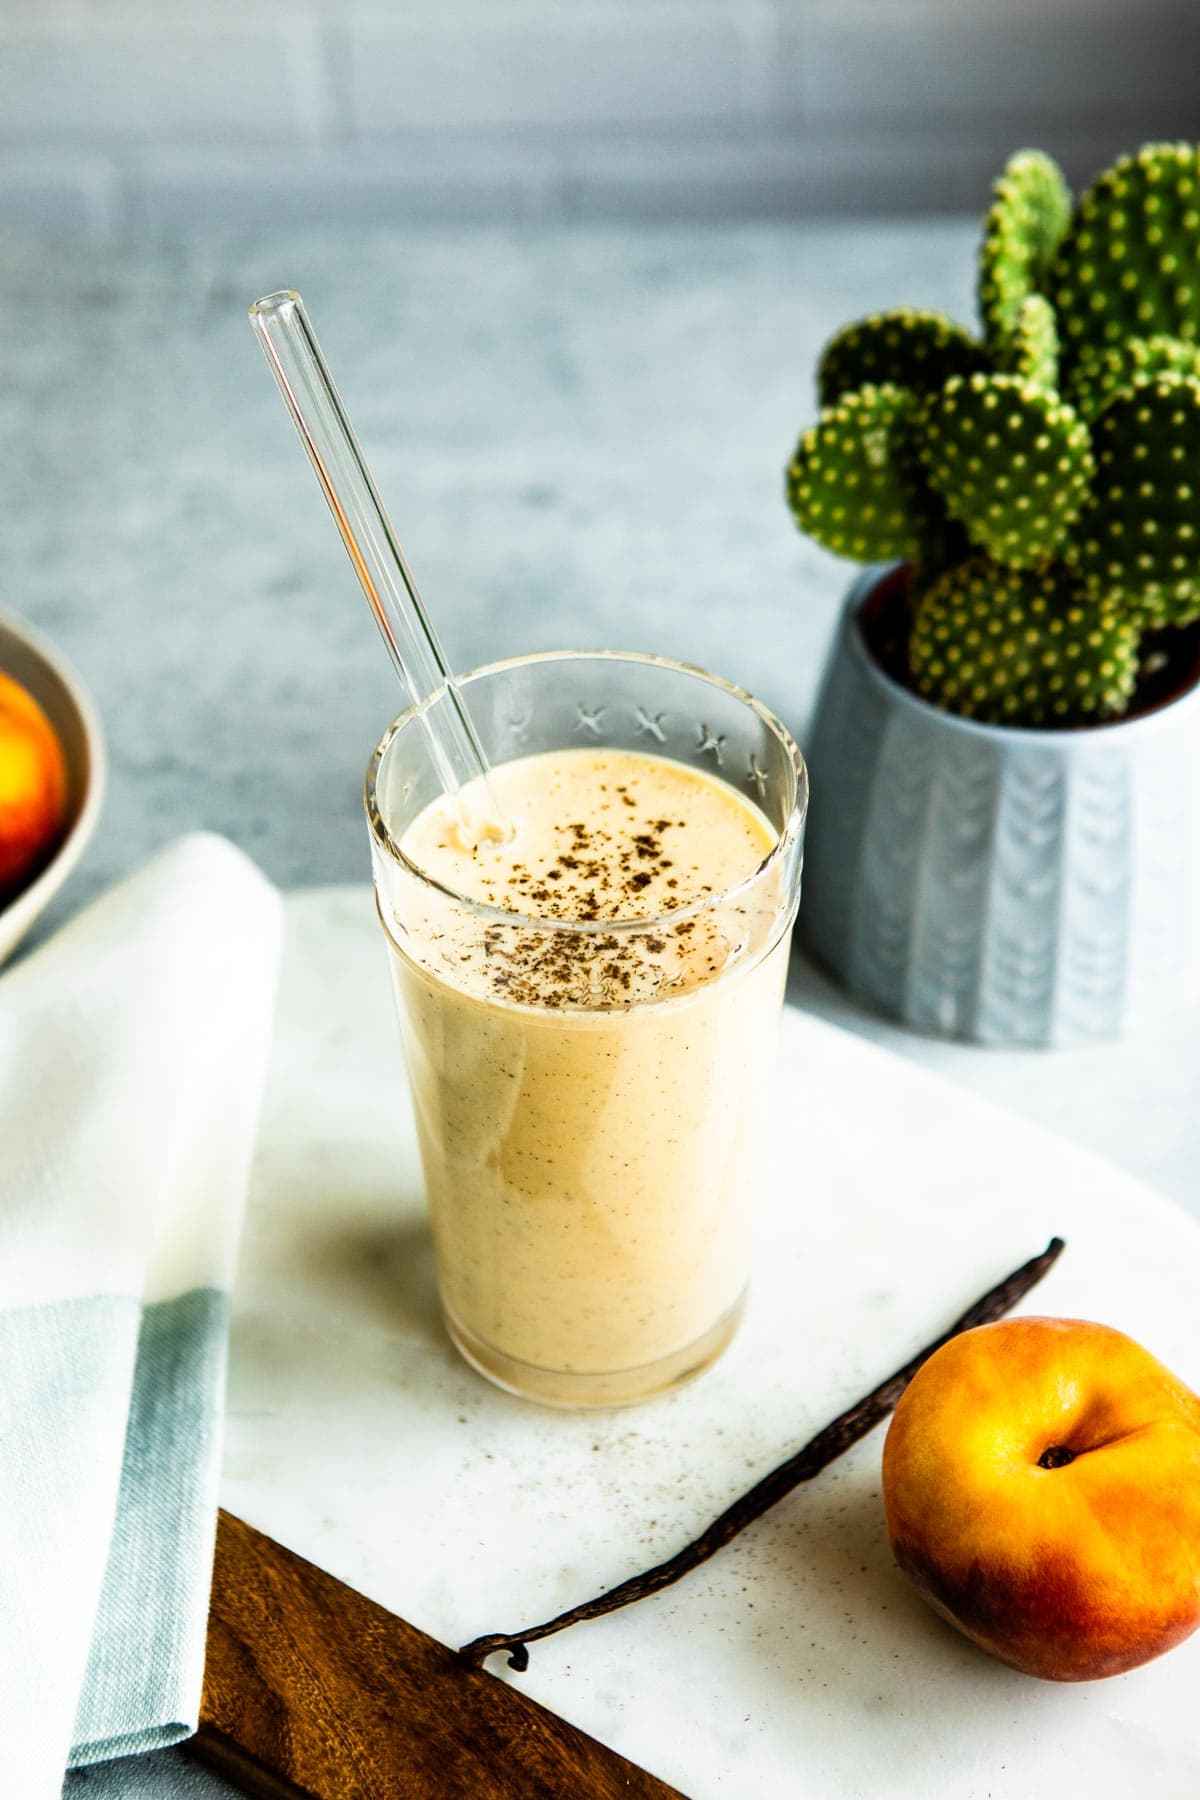 healthy protein shakes in a glass with a glass straw on a marble slab with a vanilla bean and whole peach sitting next to it.